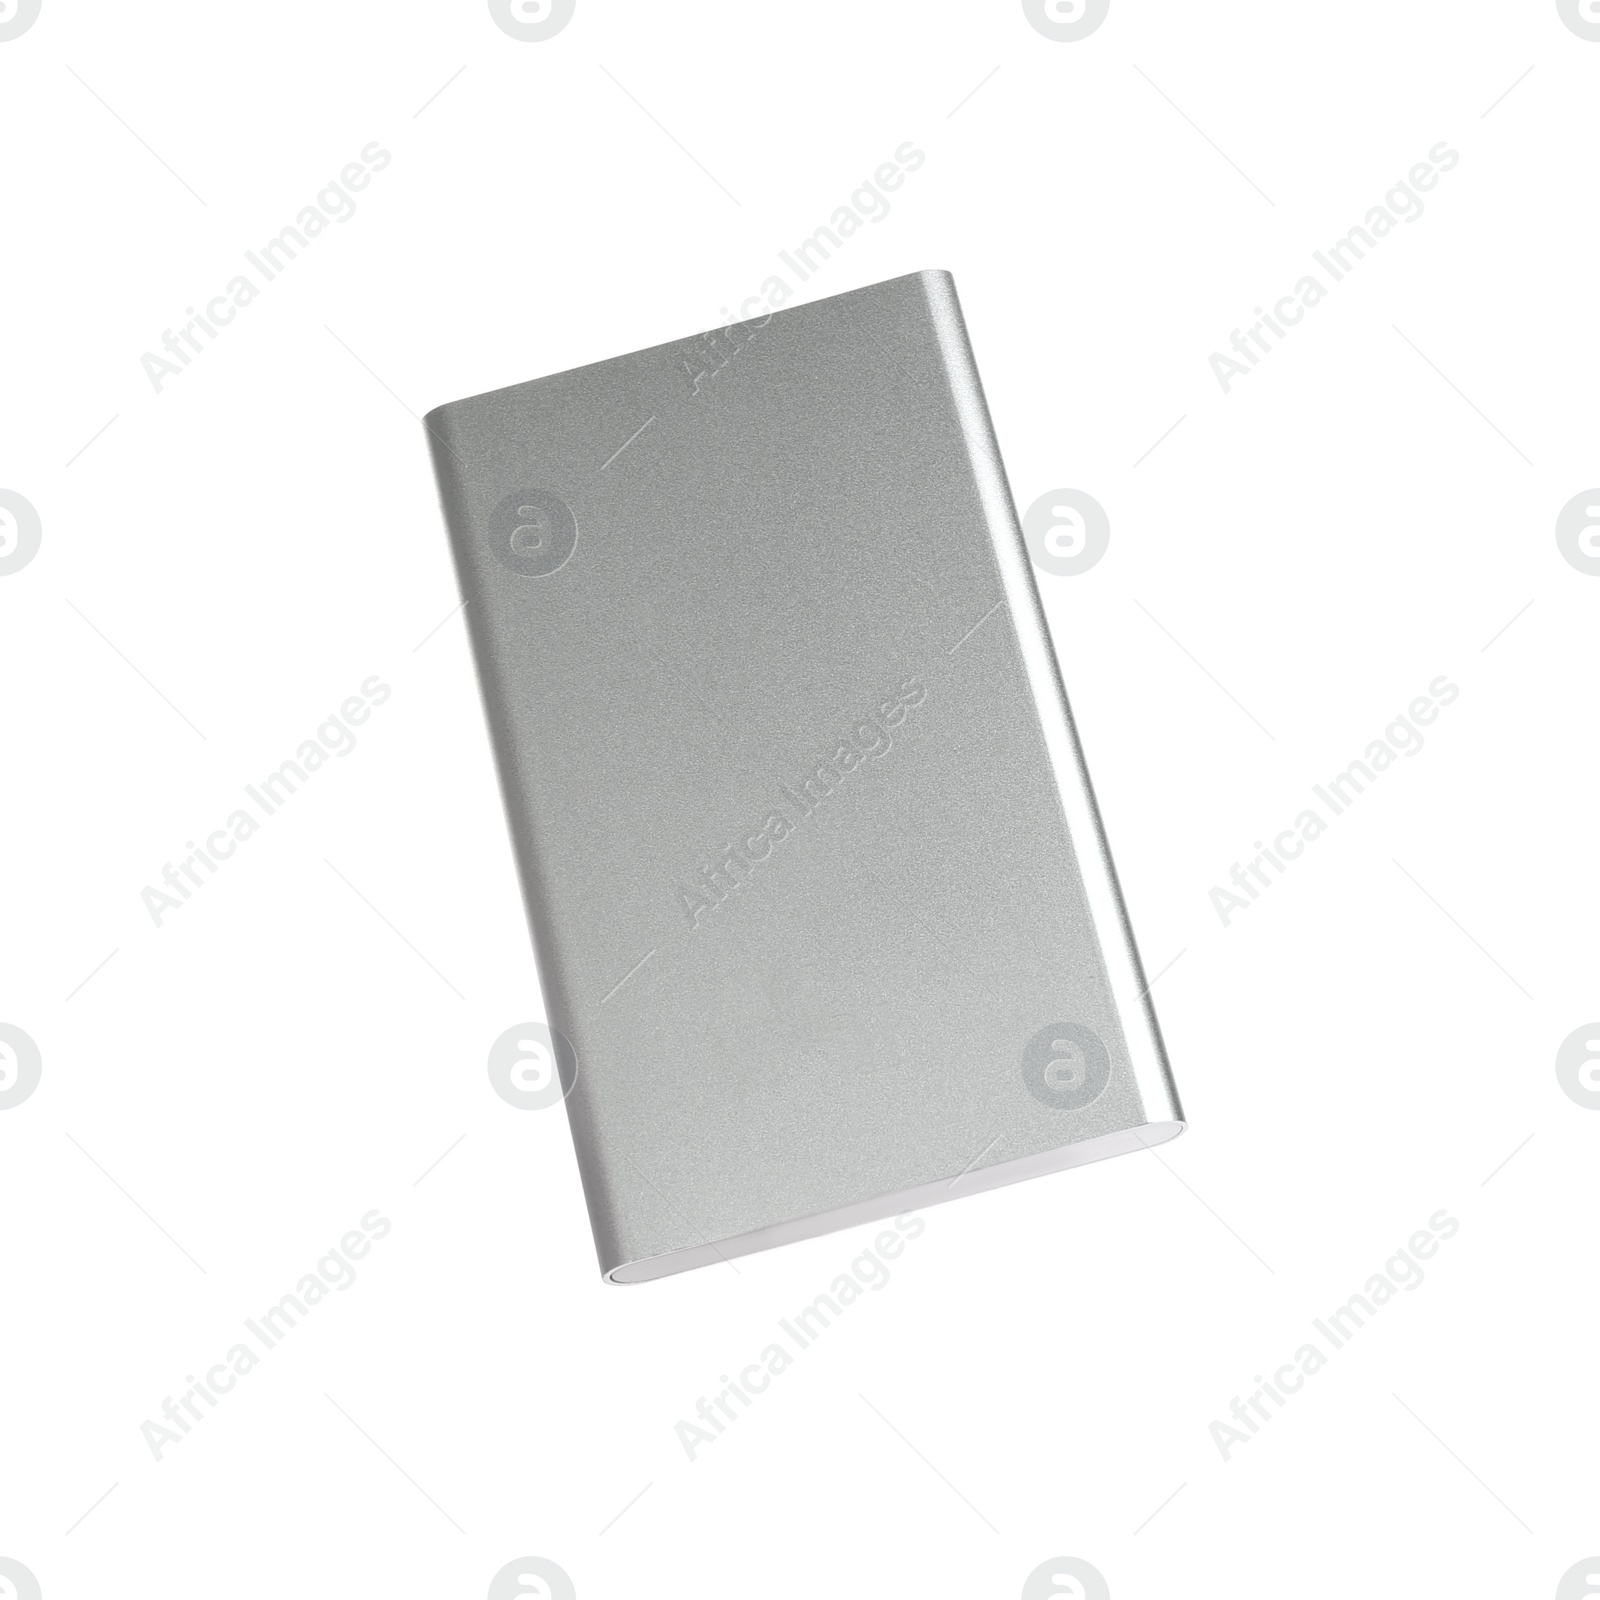 Photo of Modern external portable charger isolated on white